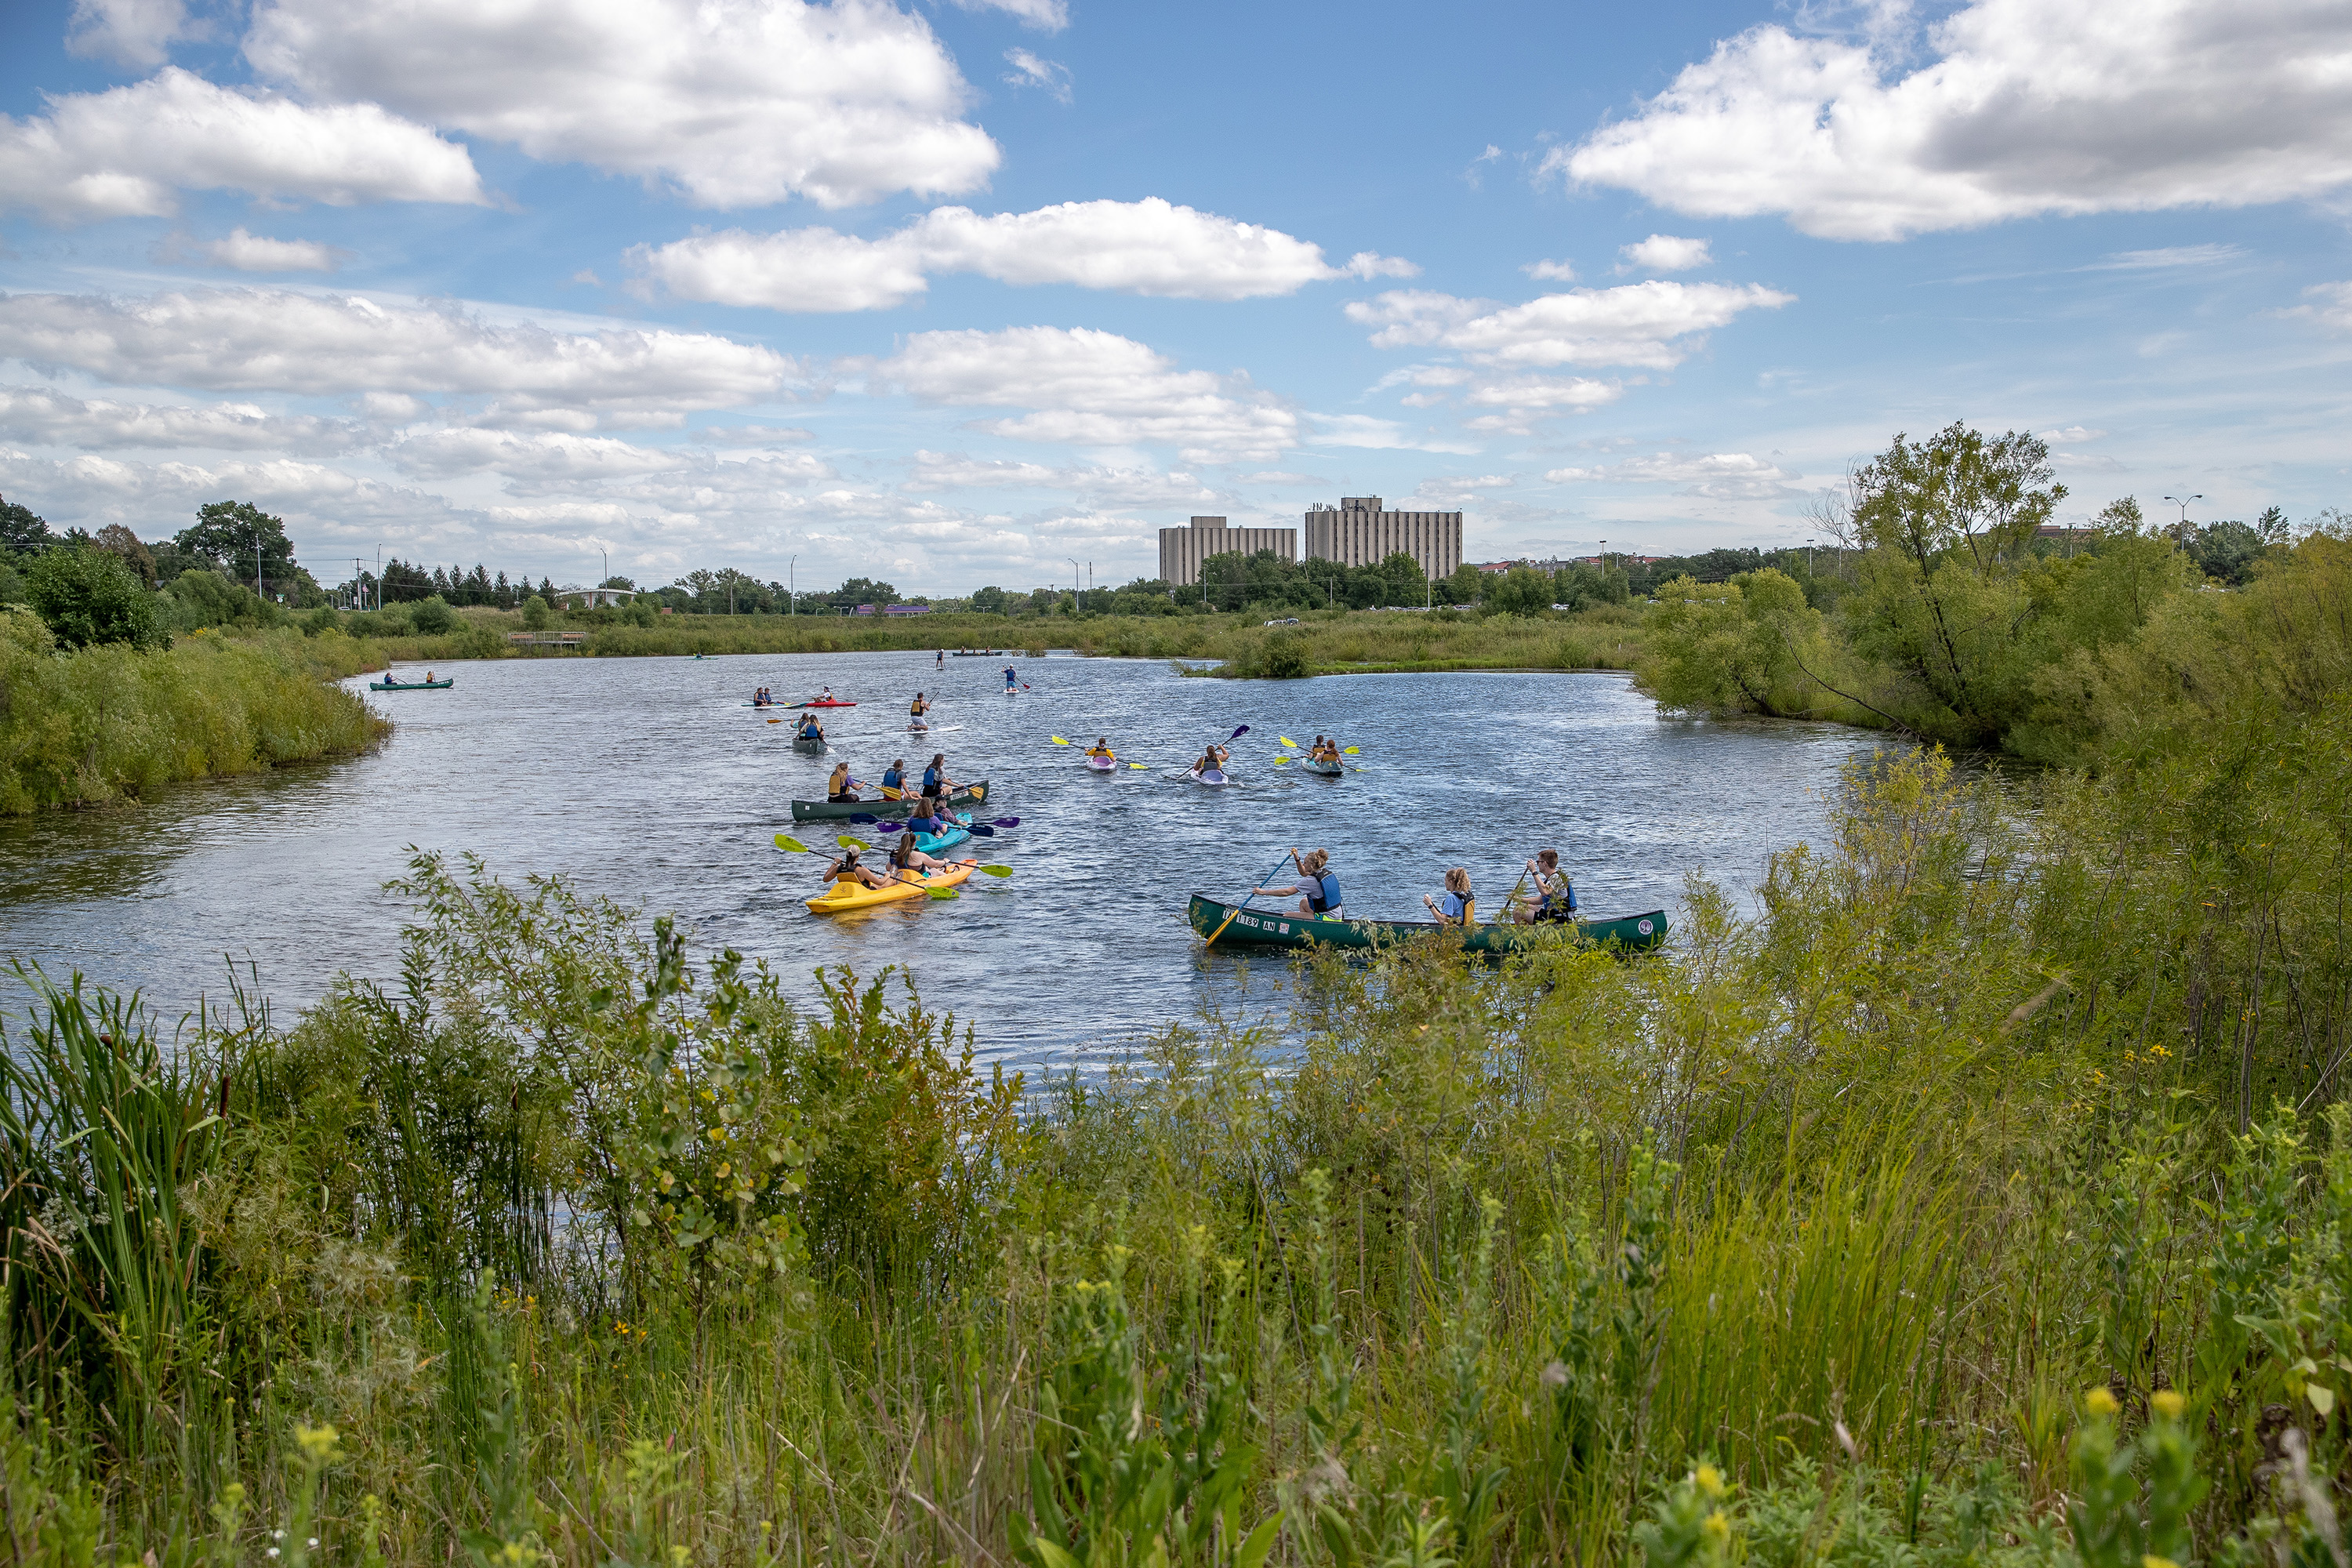 UNI students participating in water recreation next to campus